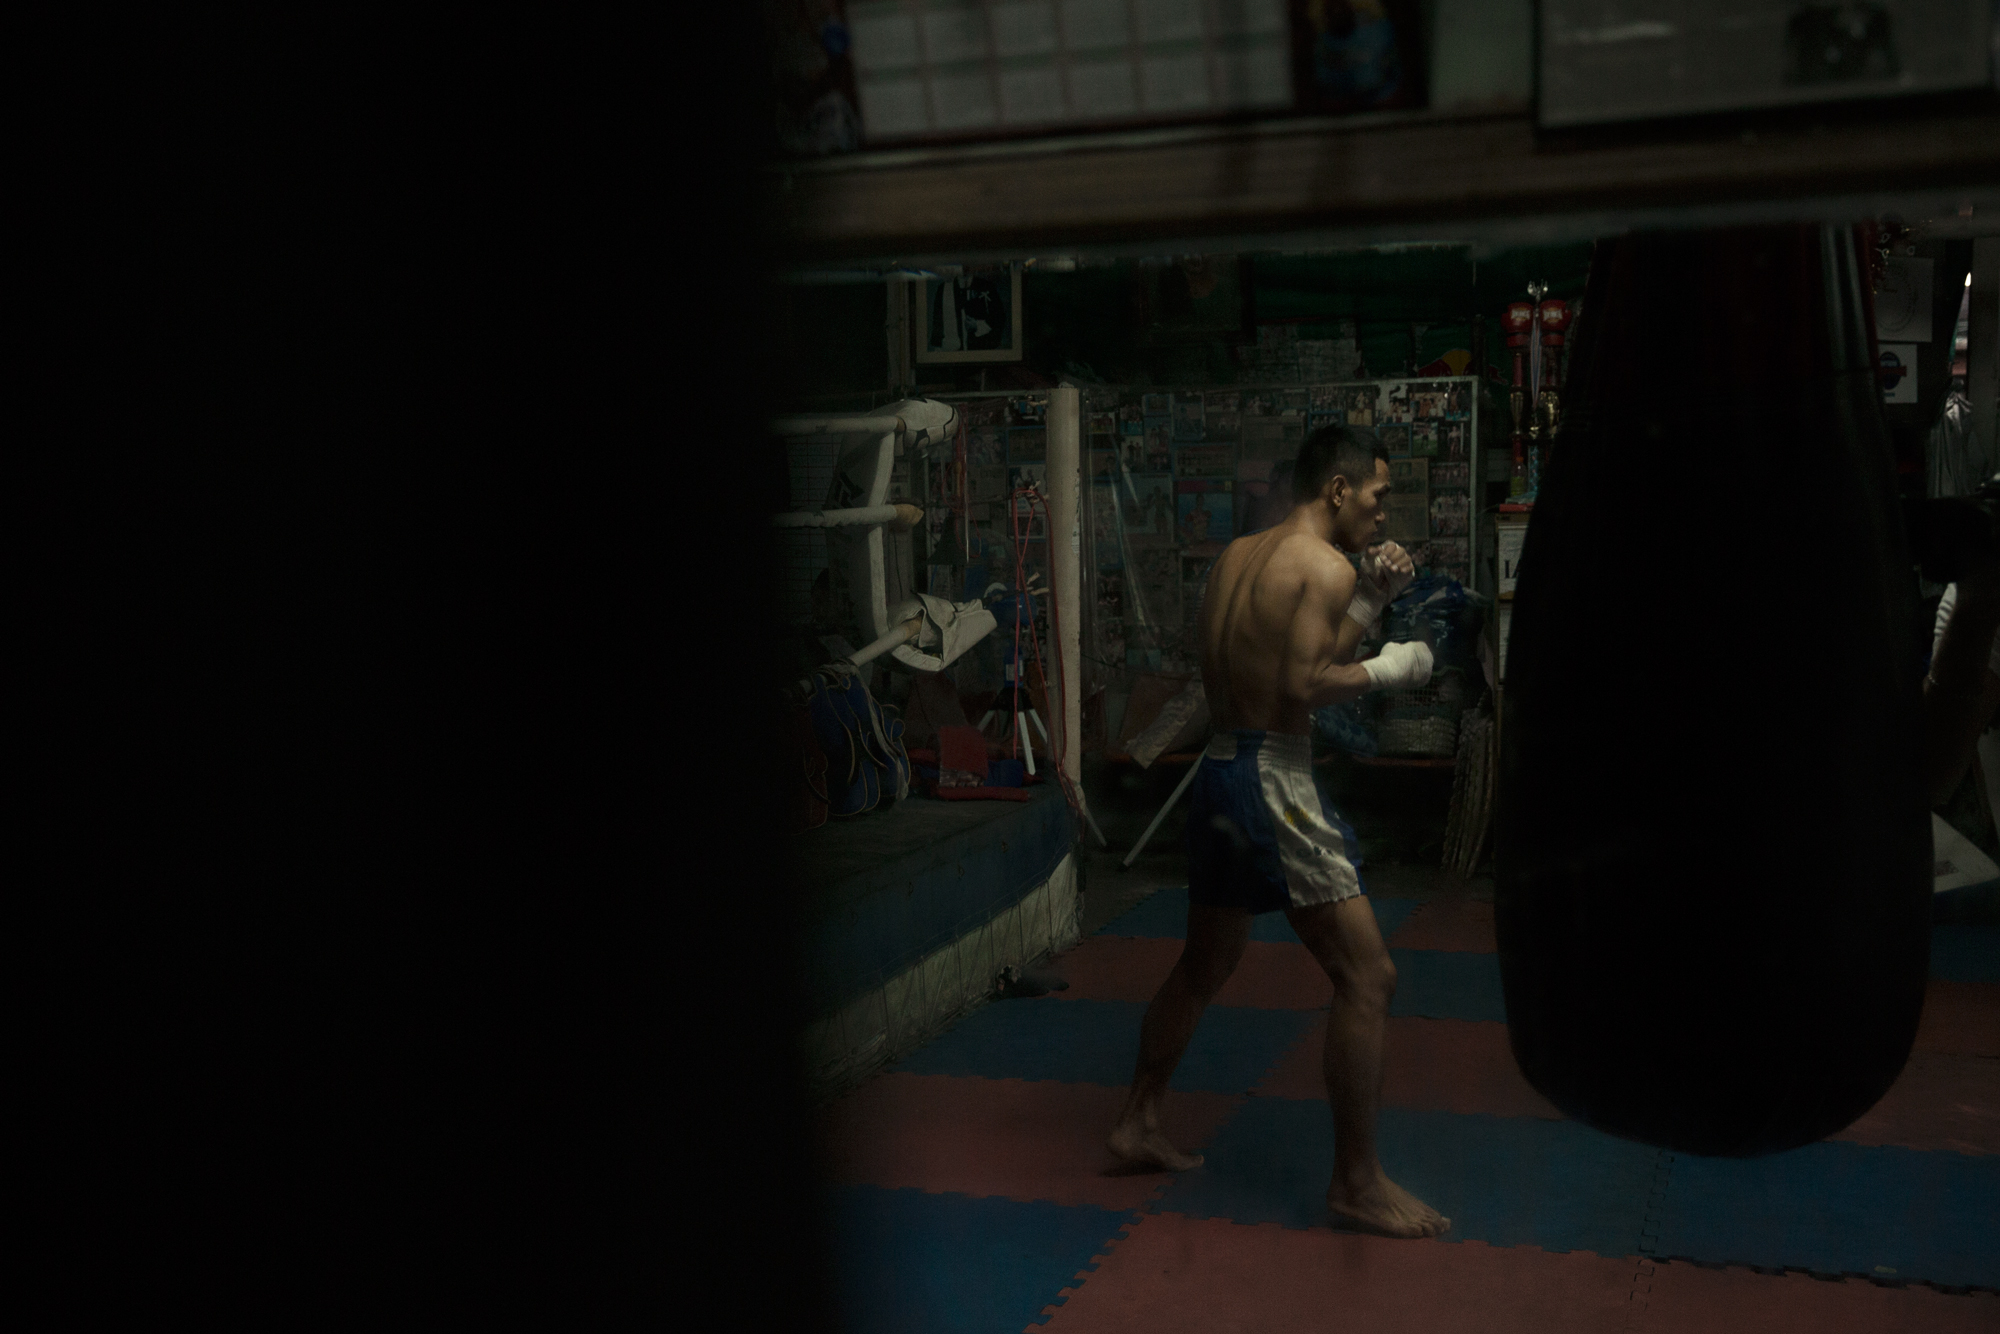 A young thai fighter photographed in Bangkok, Thailand by Maximilian Baier.